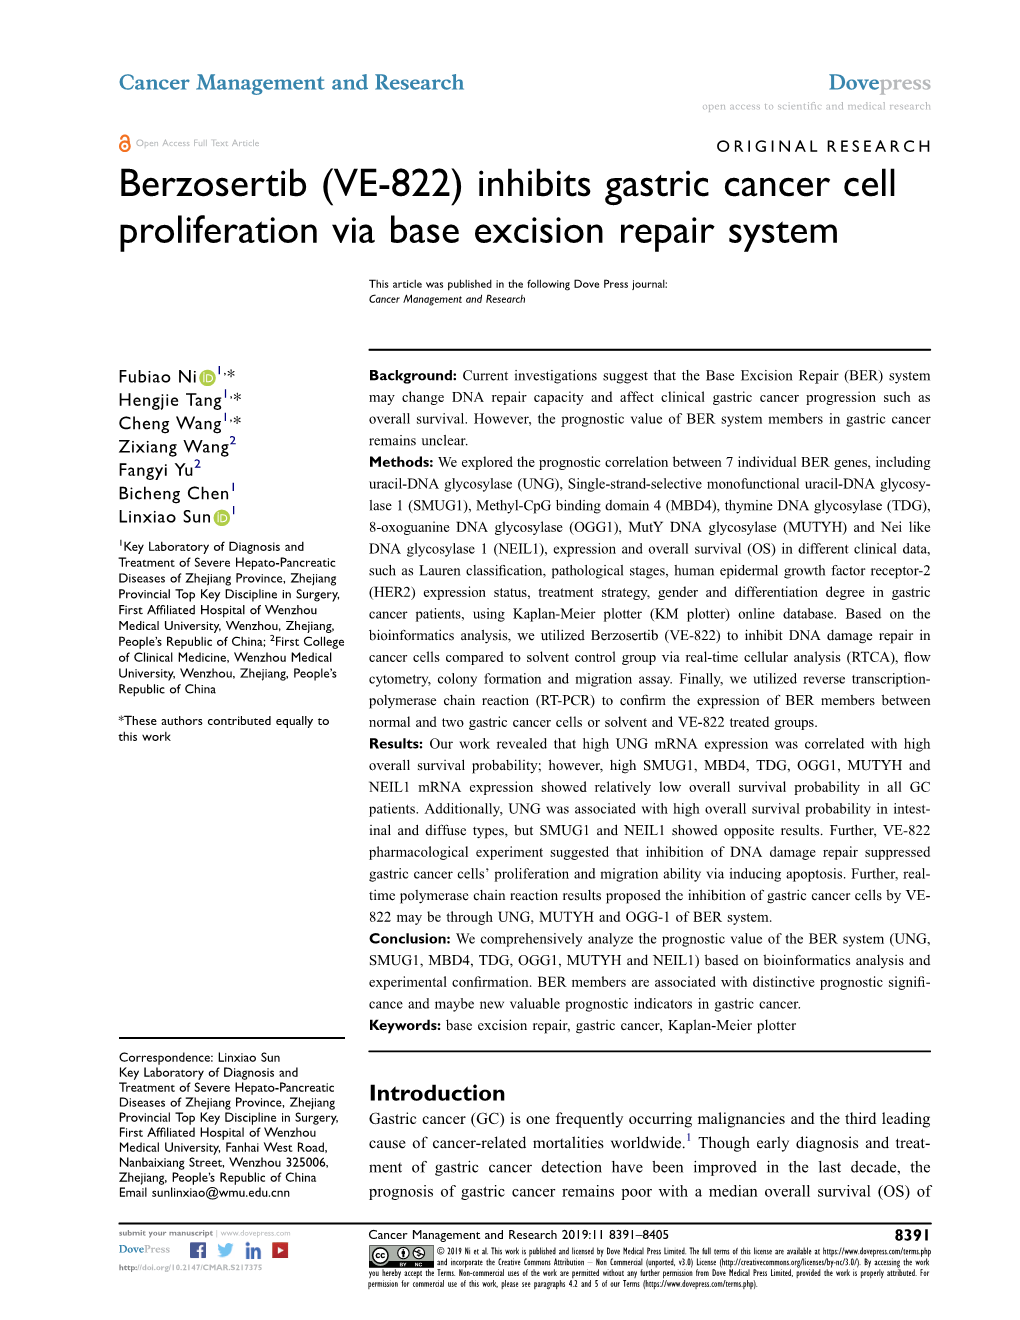 Inhibits Gastric Cancer Cell Proliferation Via Base Excision Repair System